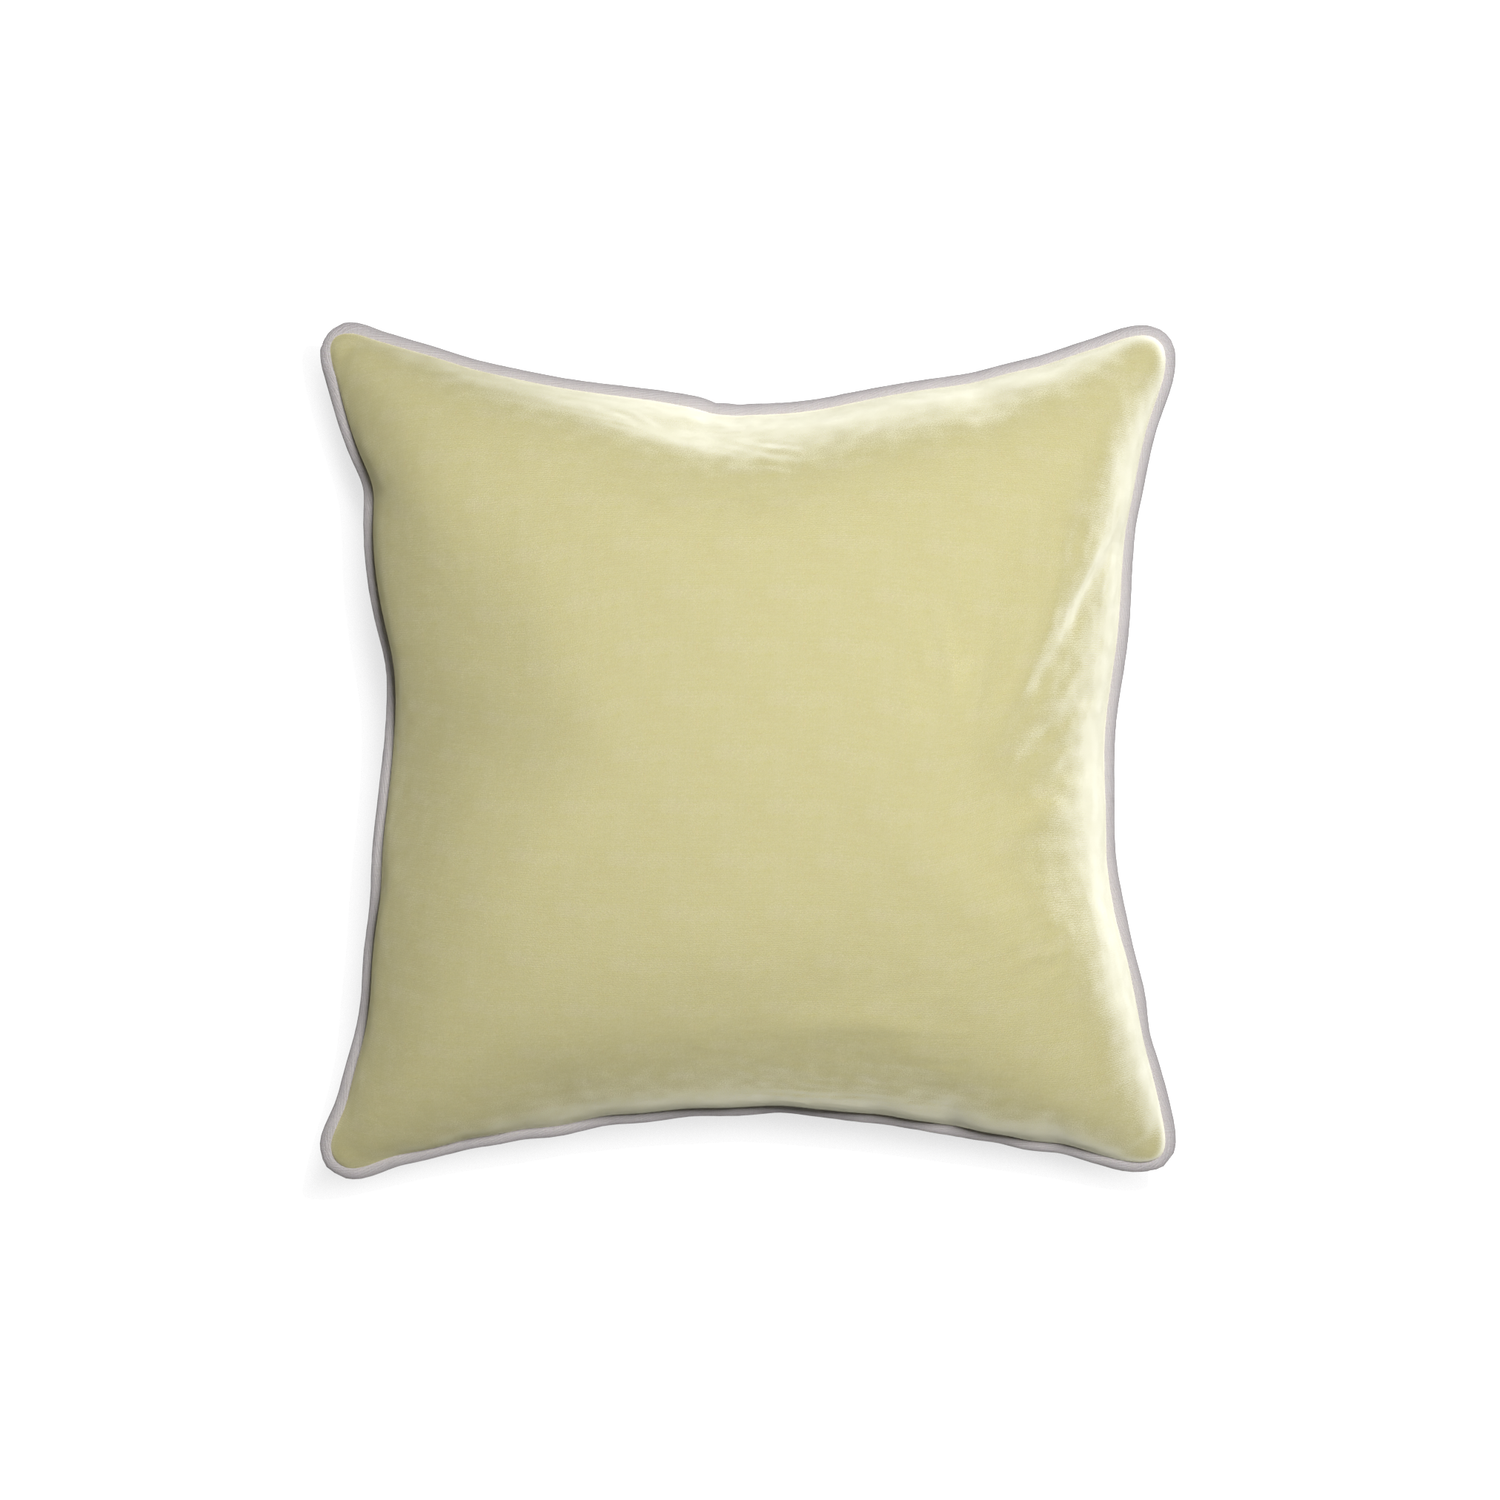 18-square pear velvet custom pillow with pebble piping on white background